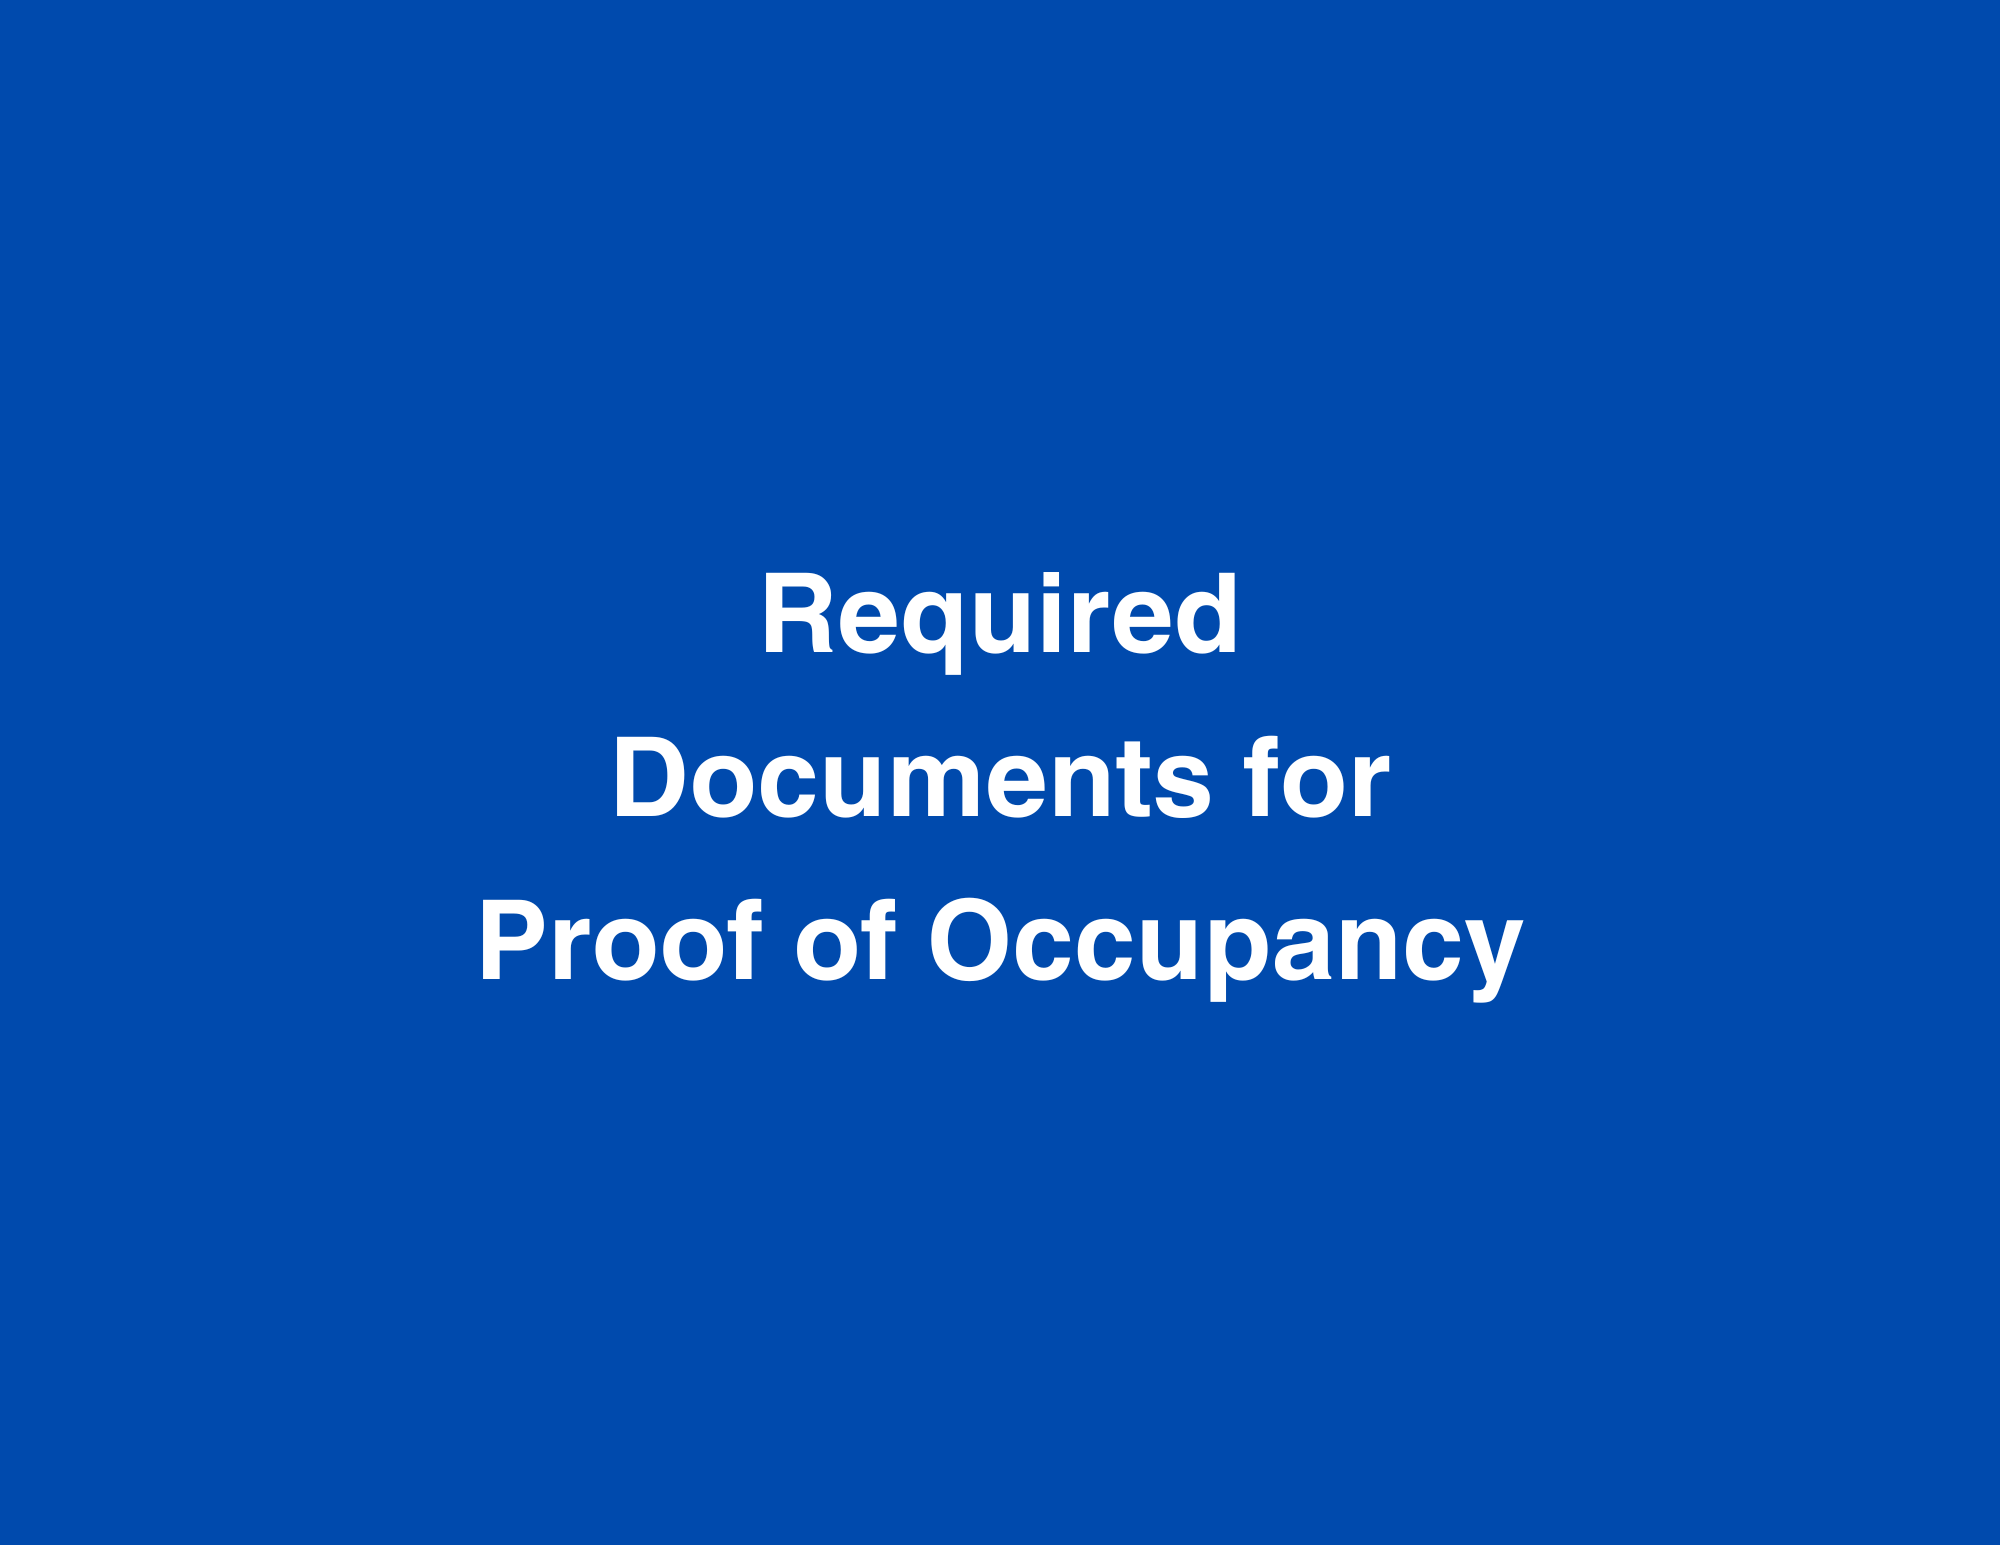 Required Documents for Proof of Occupancy